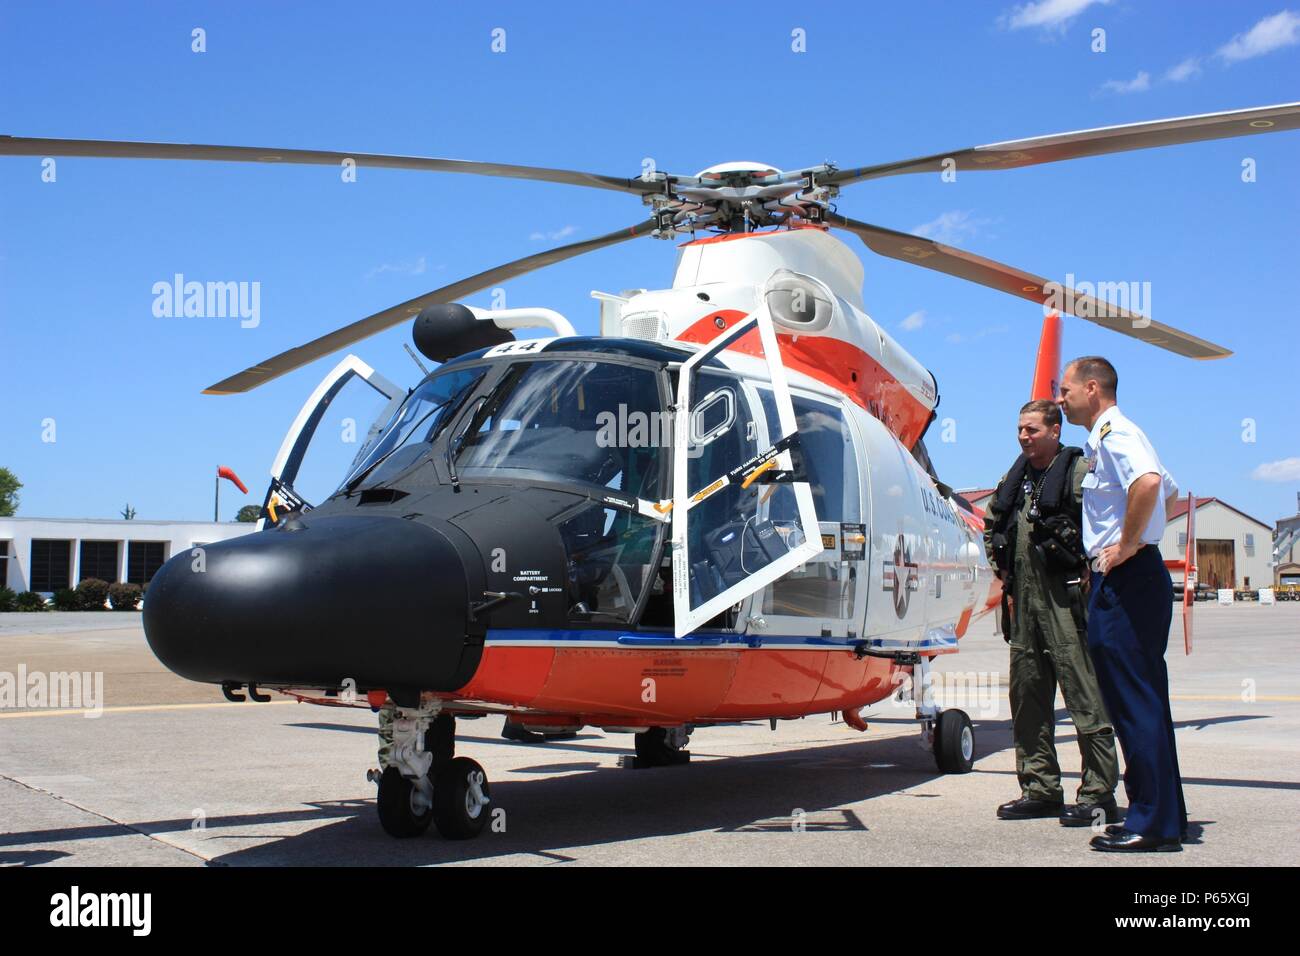 Two Coast Guardsmen stand next to a specially-painted MH-65 Dolphin helicopter, May 4, 2016, at Coast Guard Air Station Savannah, Georgia. The helicopter was flown to the air station as part of the unit’s observance of the Coast Guard’s yearlong celebration of 100 years of aviation. U.S. Coast Guard photo by Lt. Trent Meyers Stock Photo